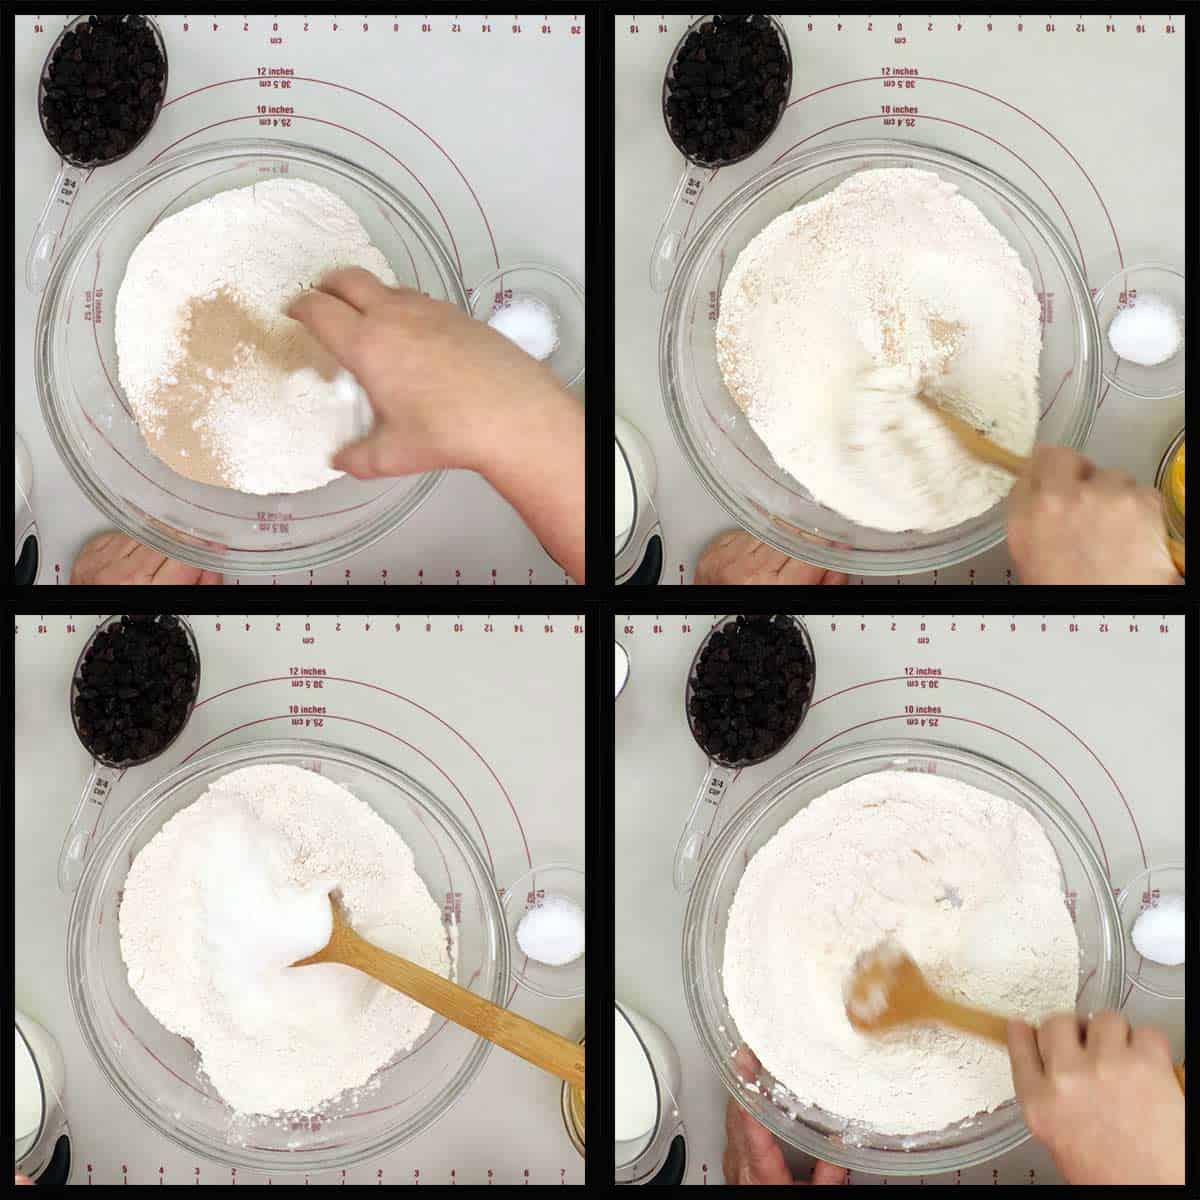 mixing yeast and sugar with flour for cinnamon raisin bread.